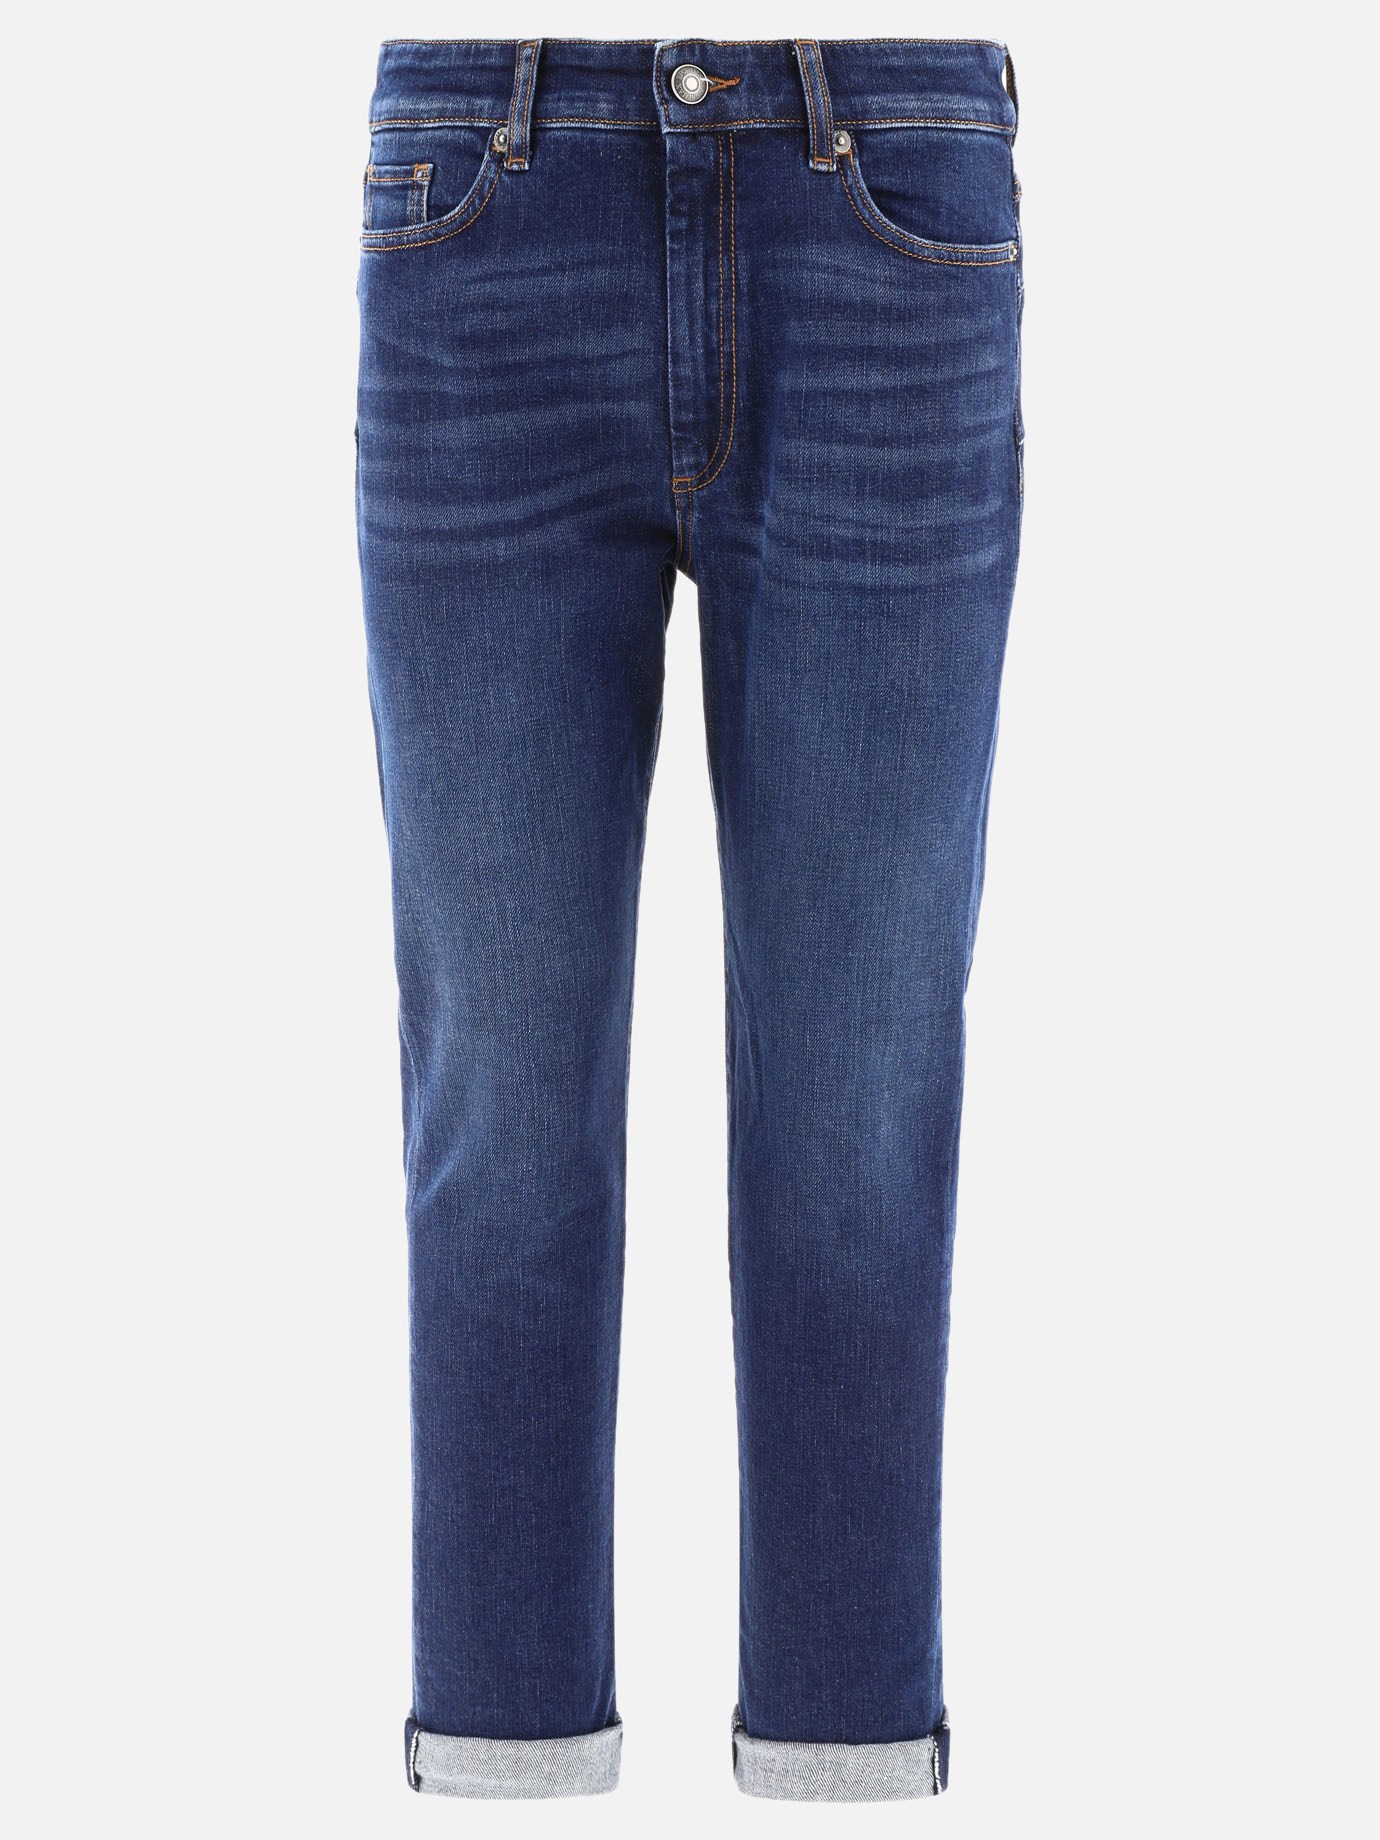  Amour  jeans by Max Mara Sportmax